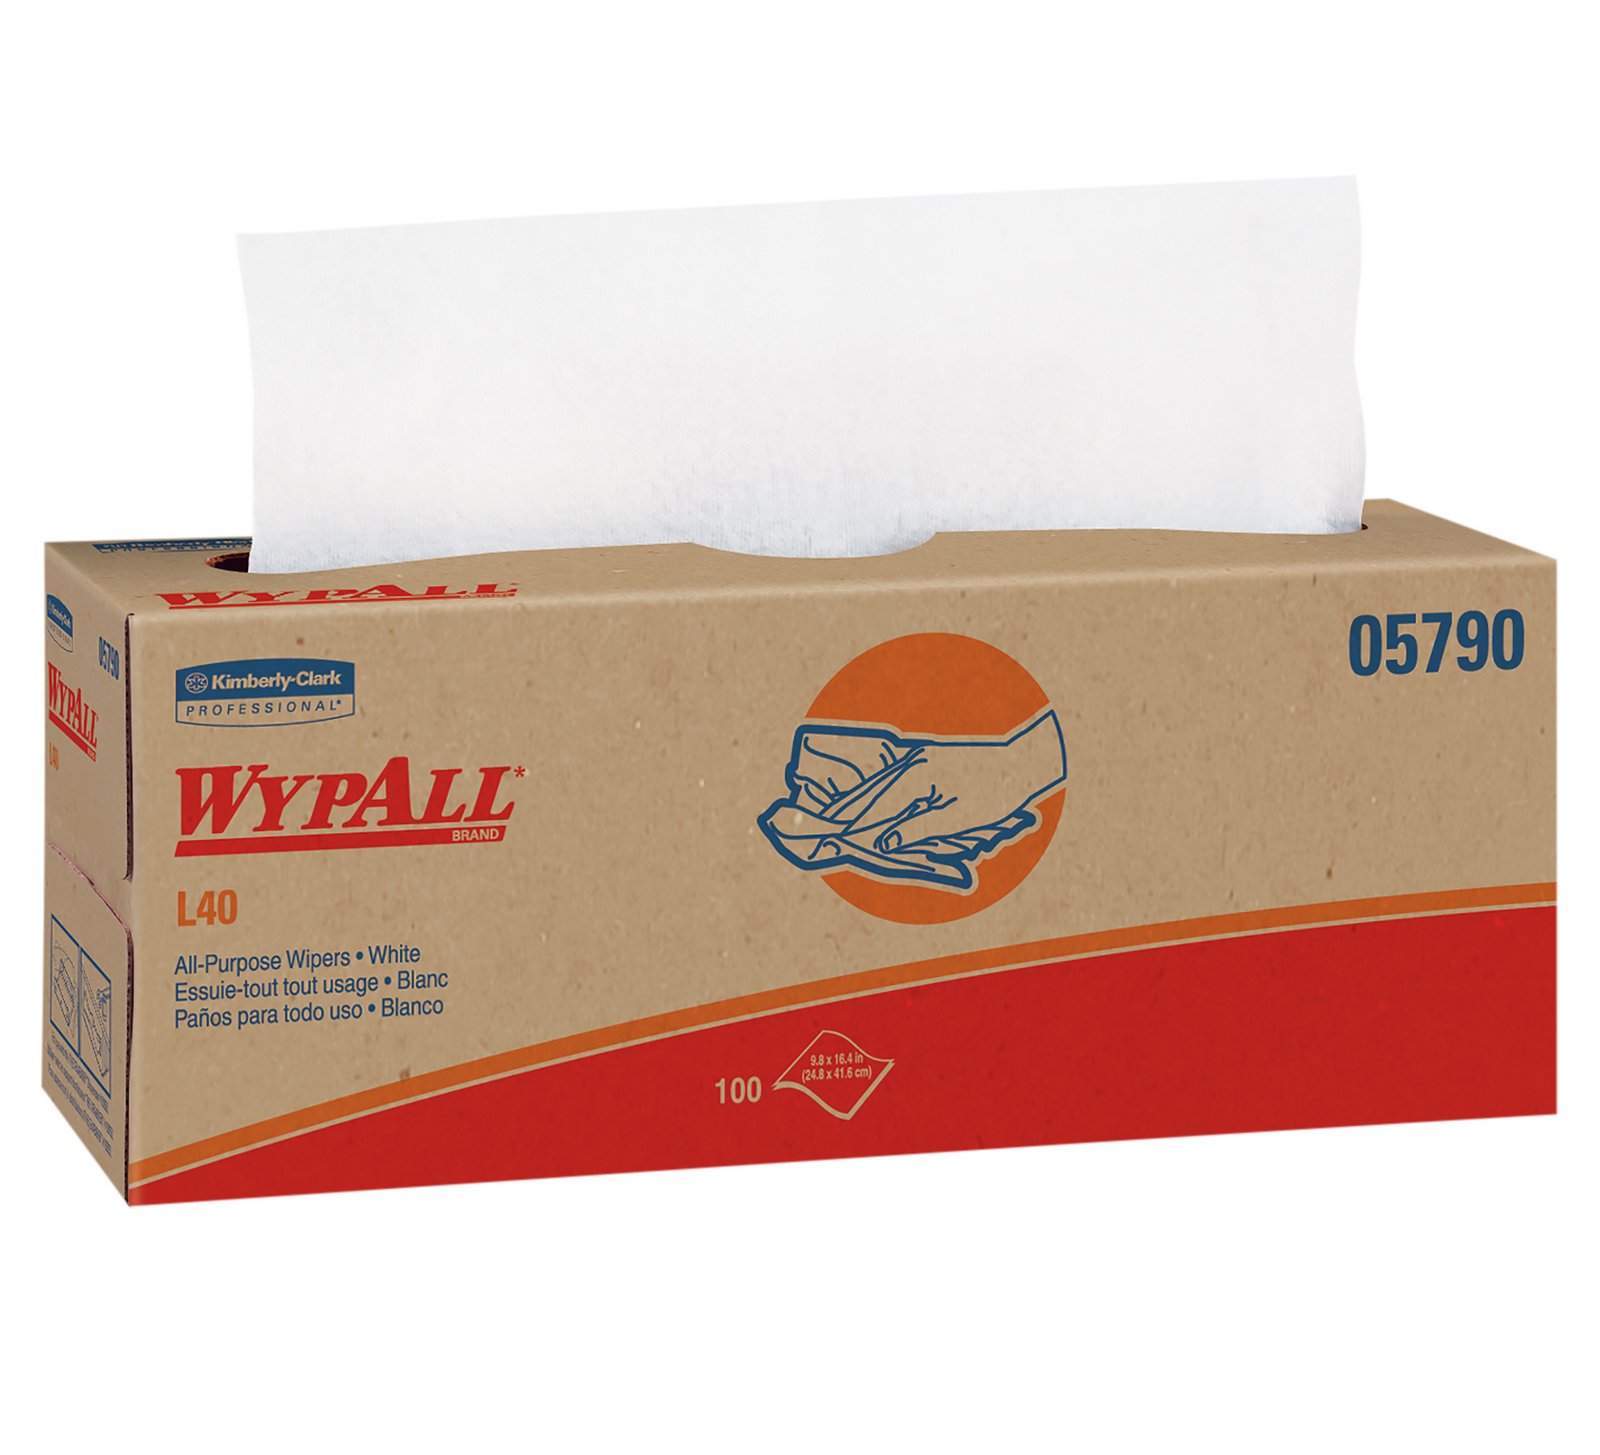 WYPALL® L40 Wipers